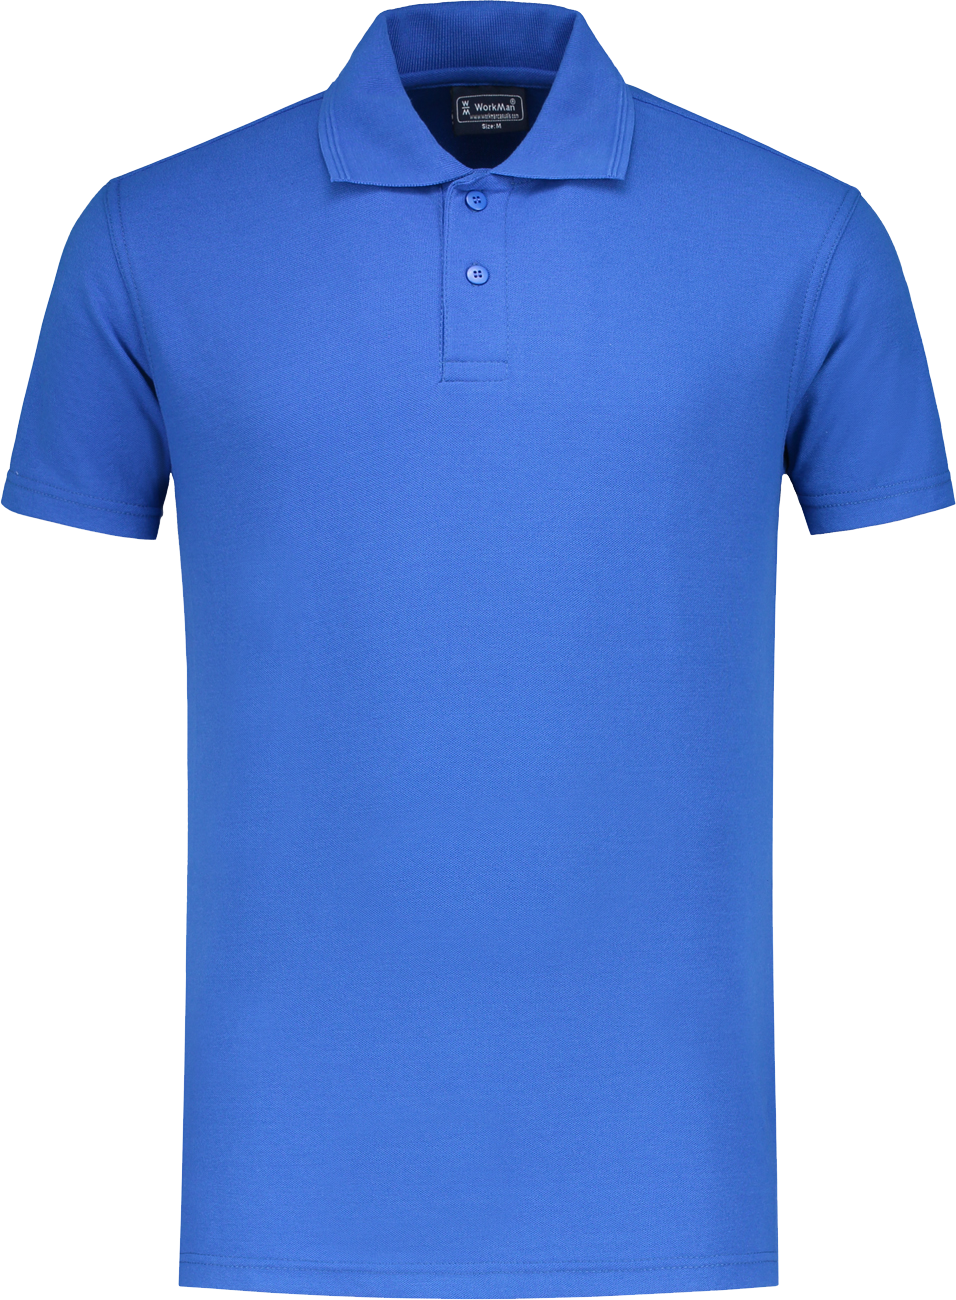 10.6.8104.08 8104 Poloshirt Outfitters Royal Blue 5XL